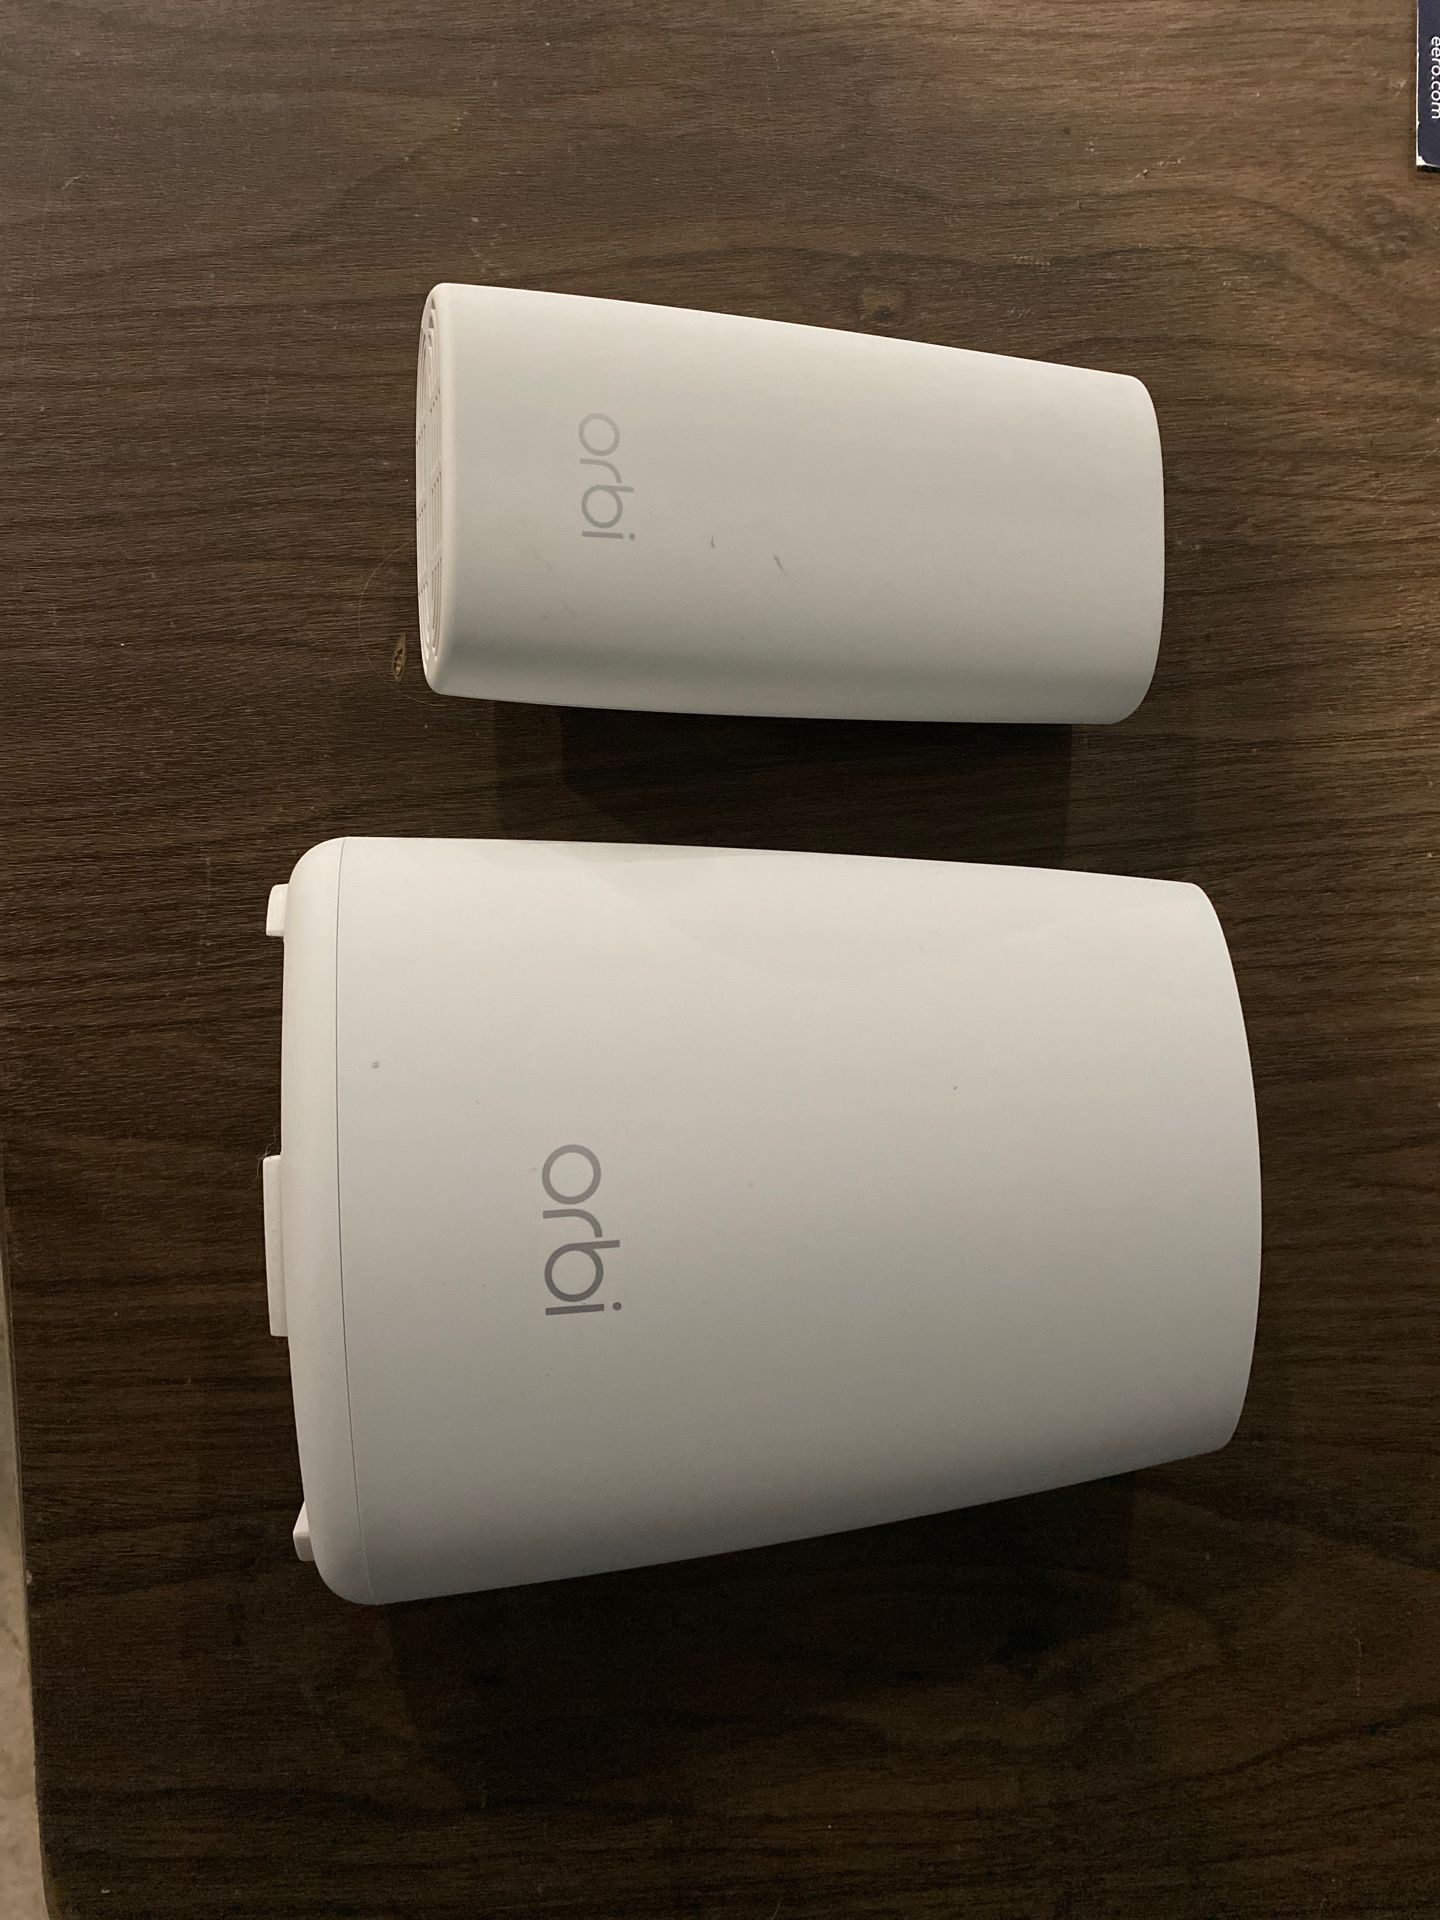 Orbi whole Home Wifi router